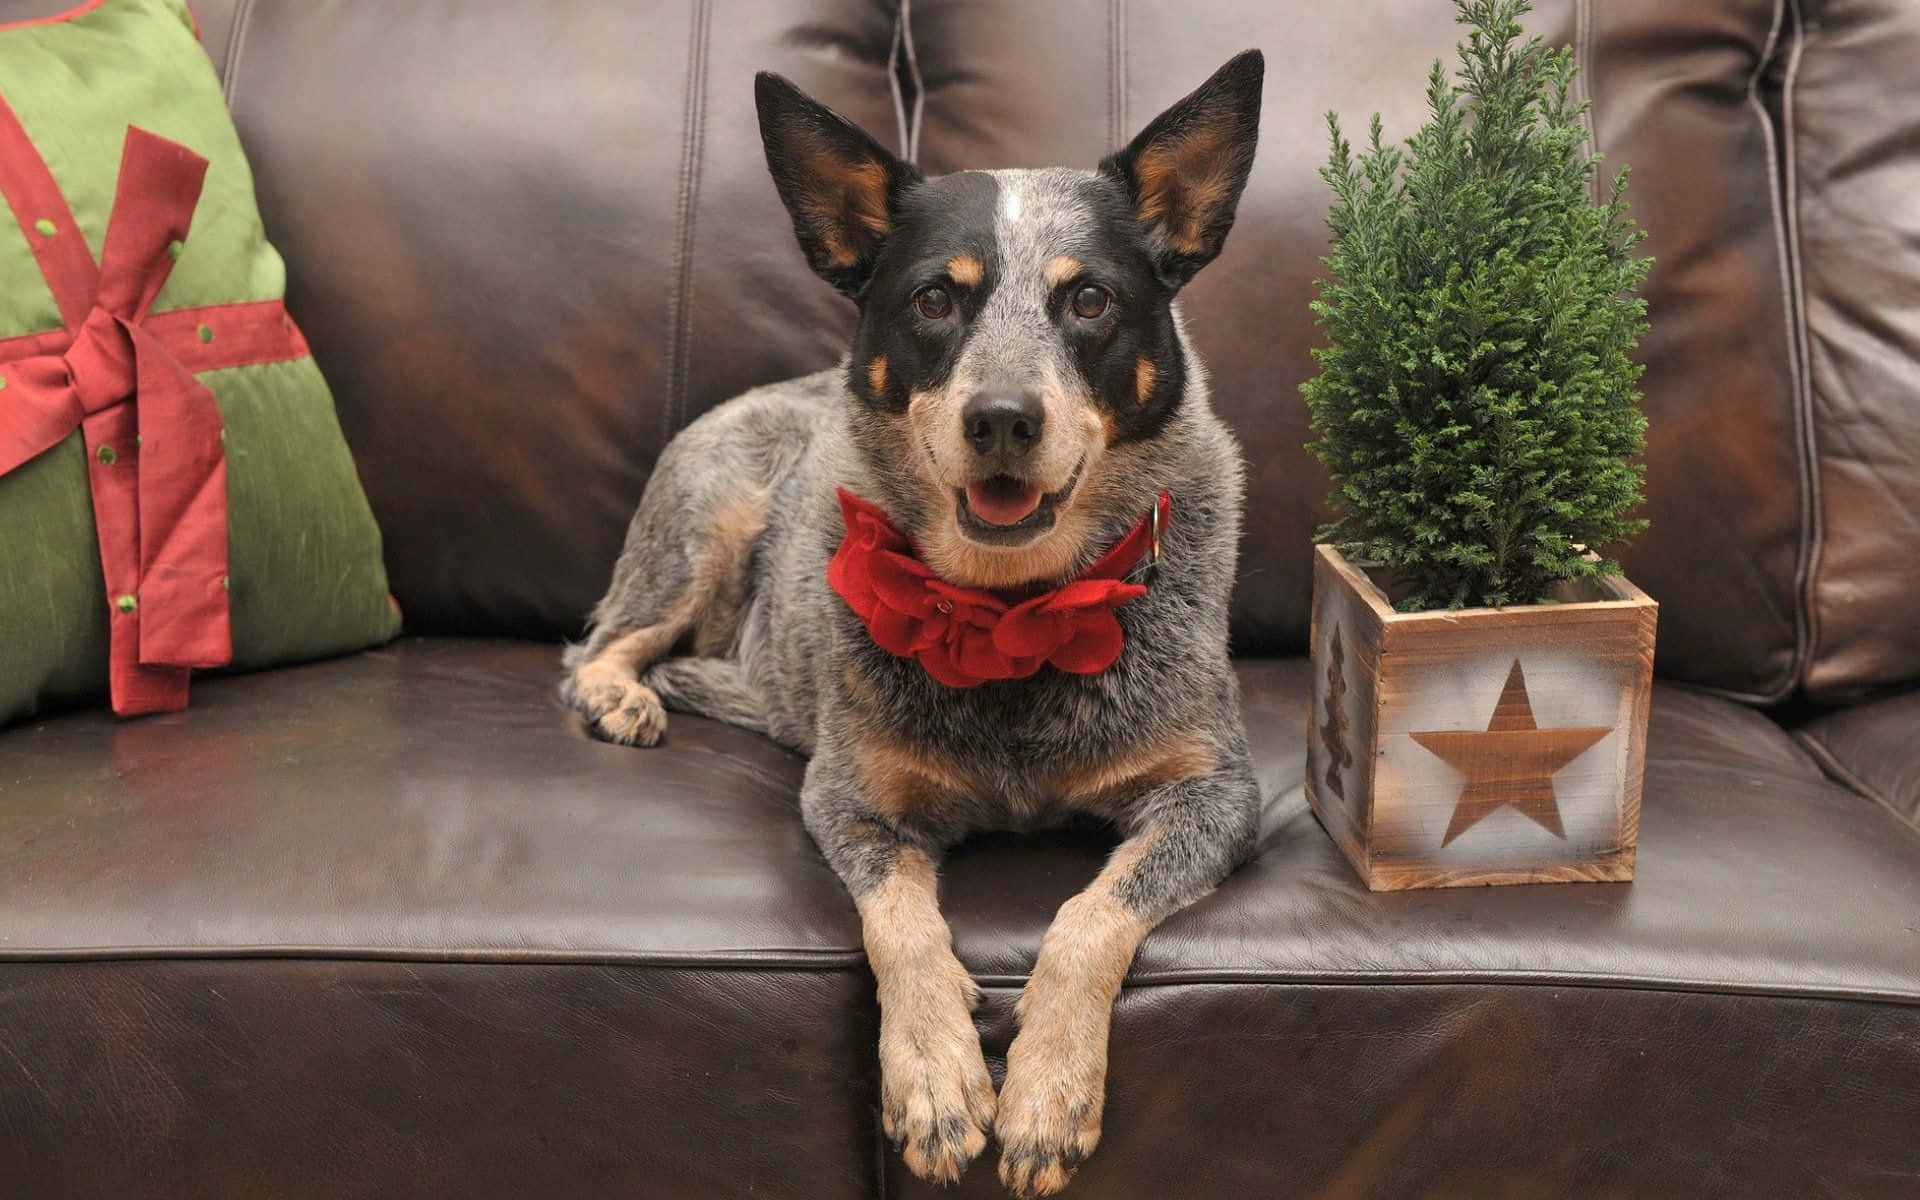 A Dog Wearing A Bow Tie On A Couch